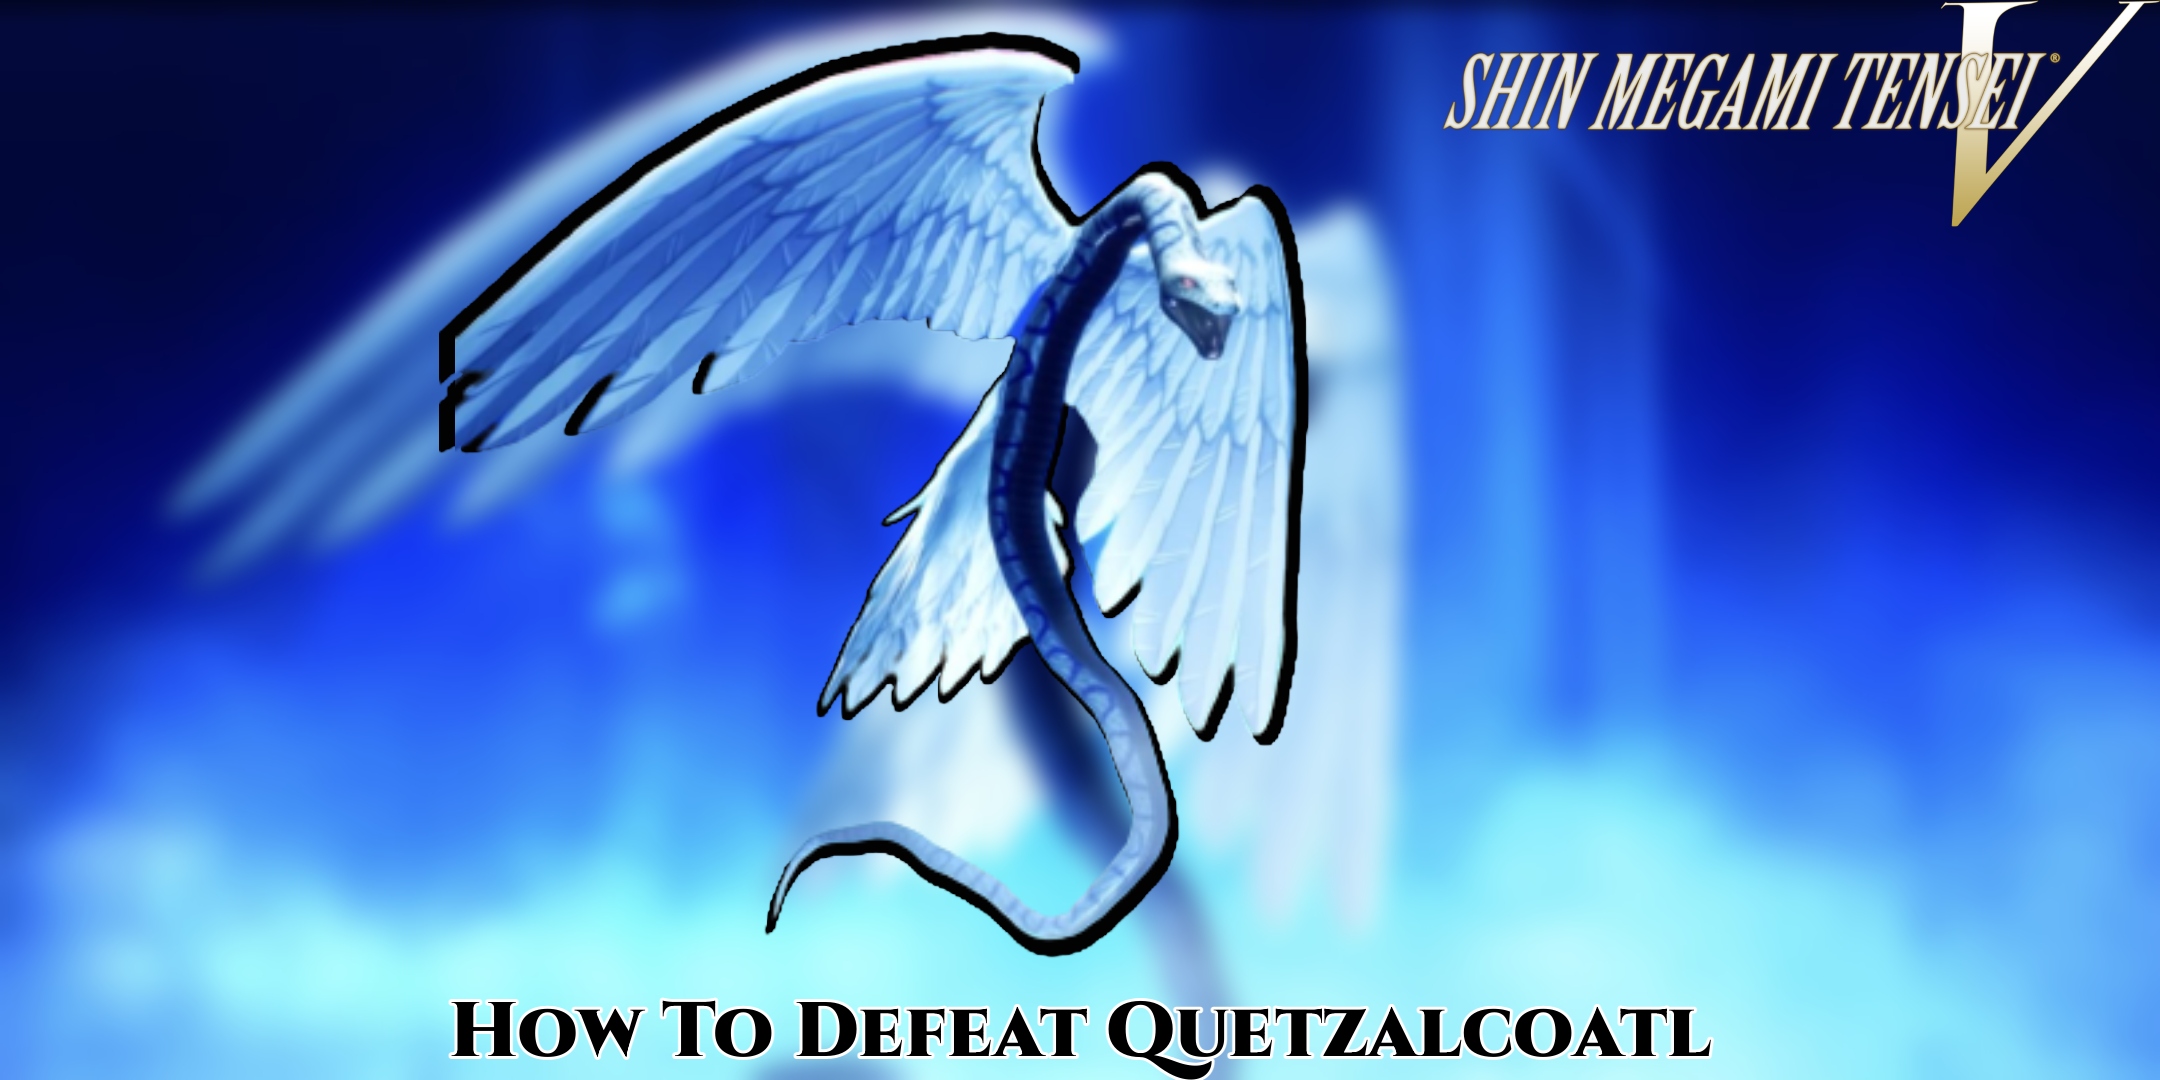 You are currently viewing Shin Megami Tensei V: How To Defeat Quetzalcoatl